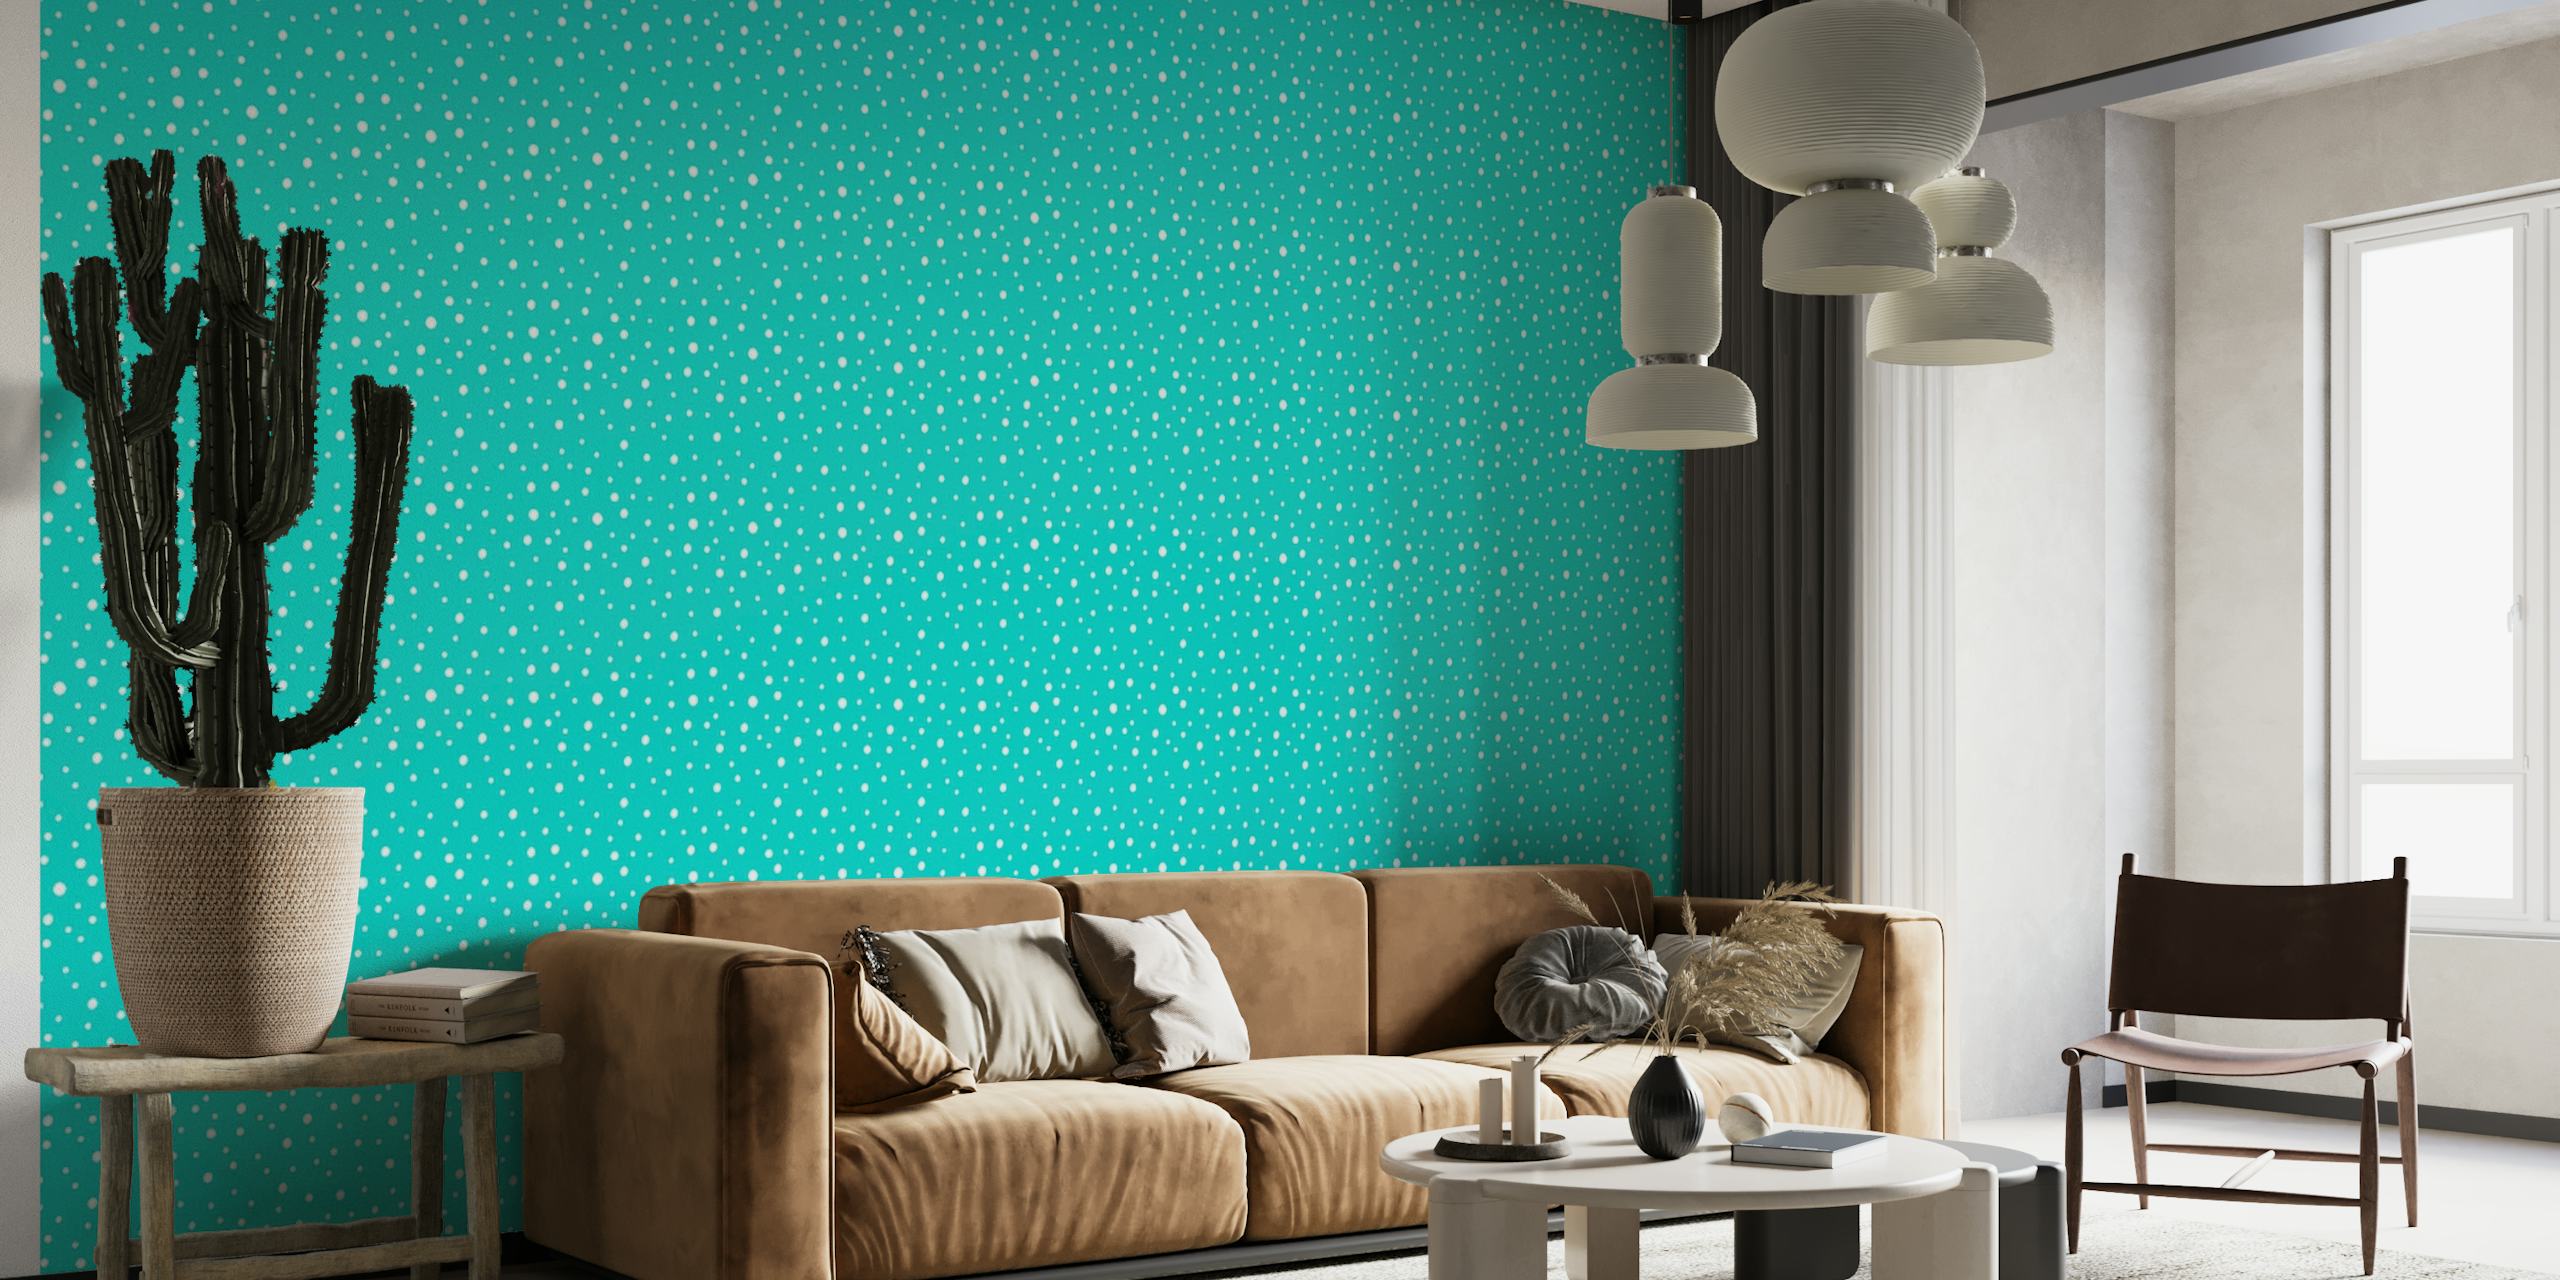 White Dots on Turquoise wallpaper